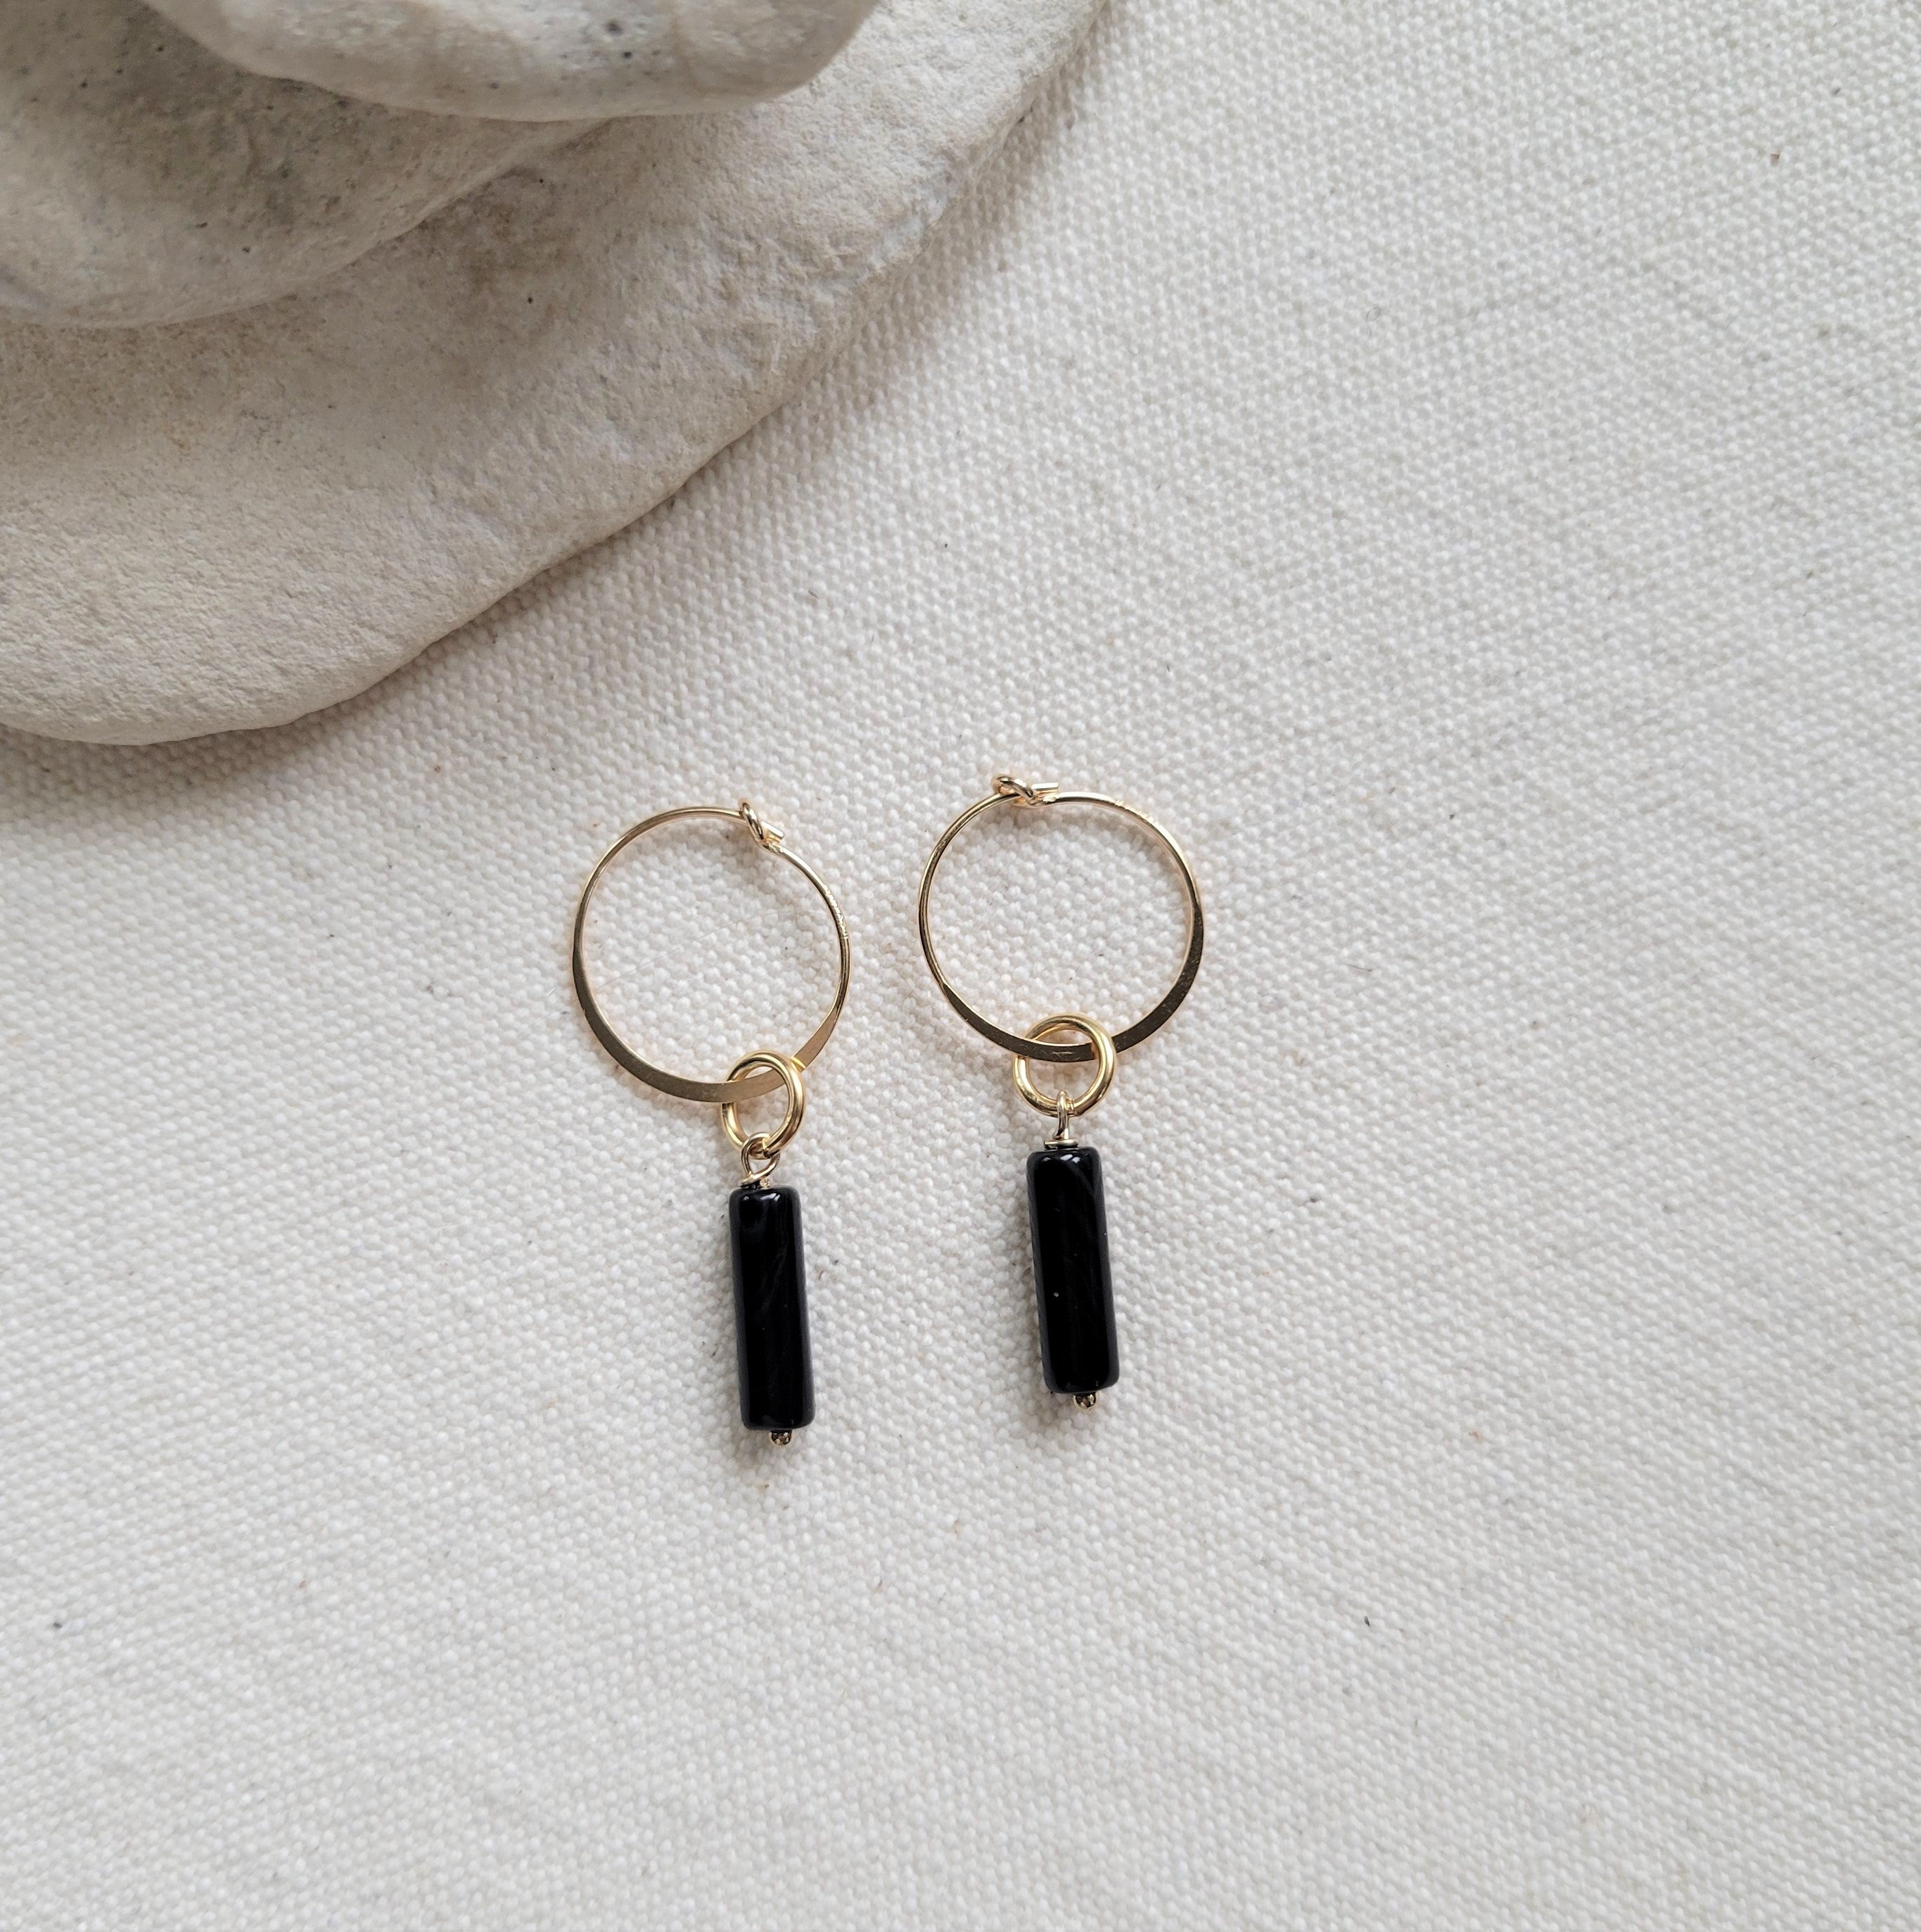 The Cylinder Onyx - Cylinder Onyx  Gold Hoop Removable Charm Earrings